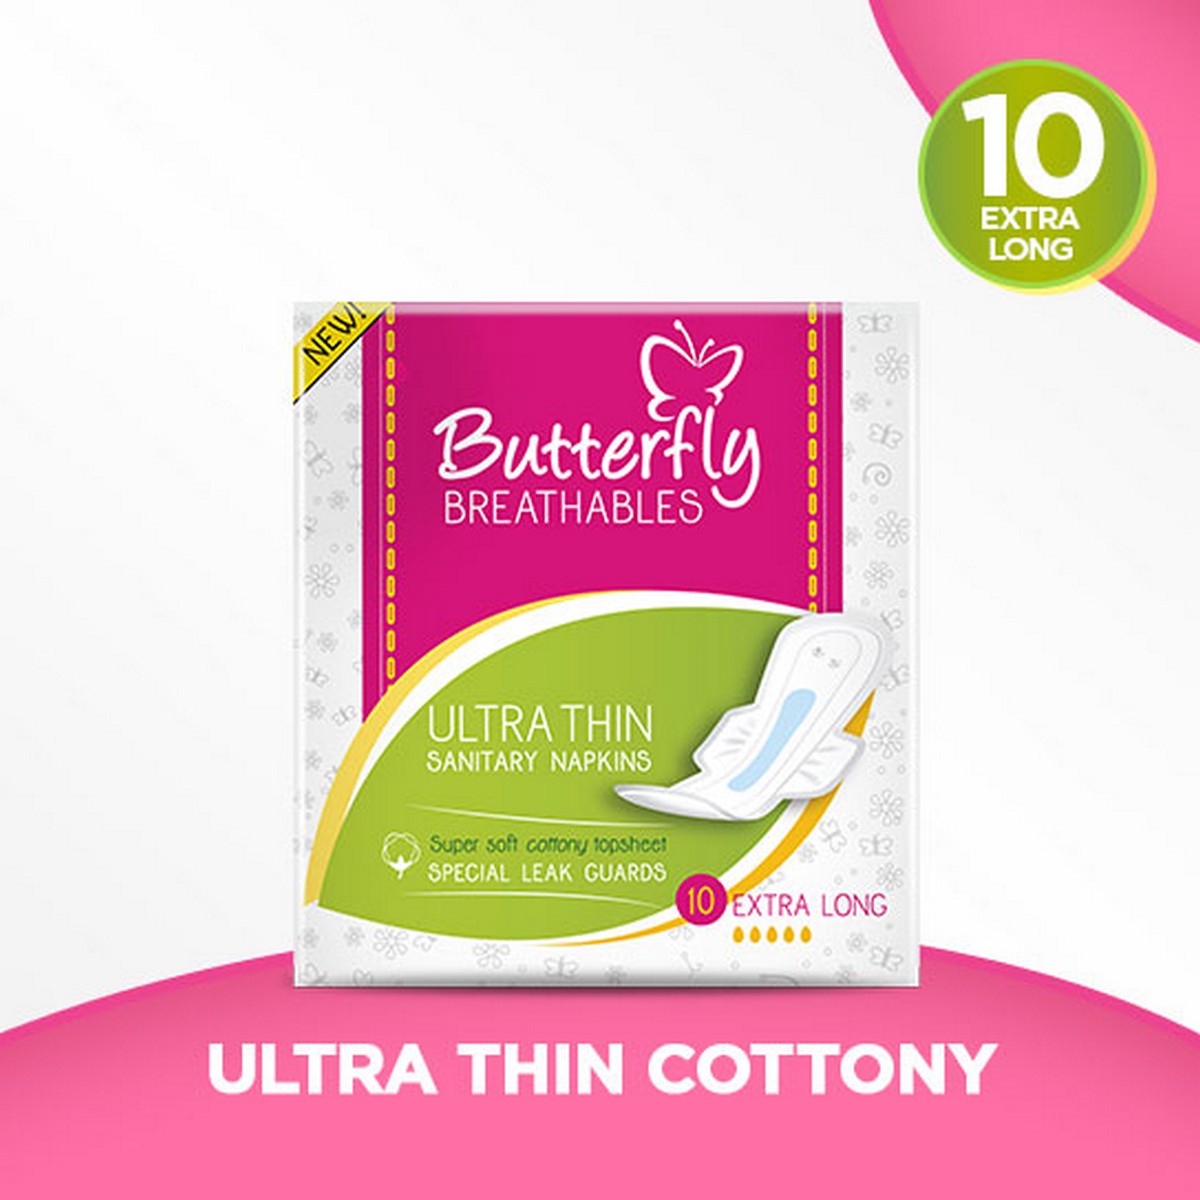 Butterfly Breathable Ultra Thin Cotton Top Sheet Sanitary Pads